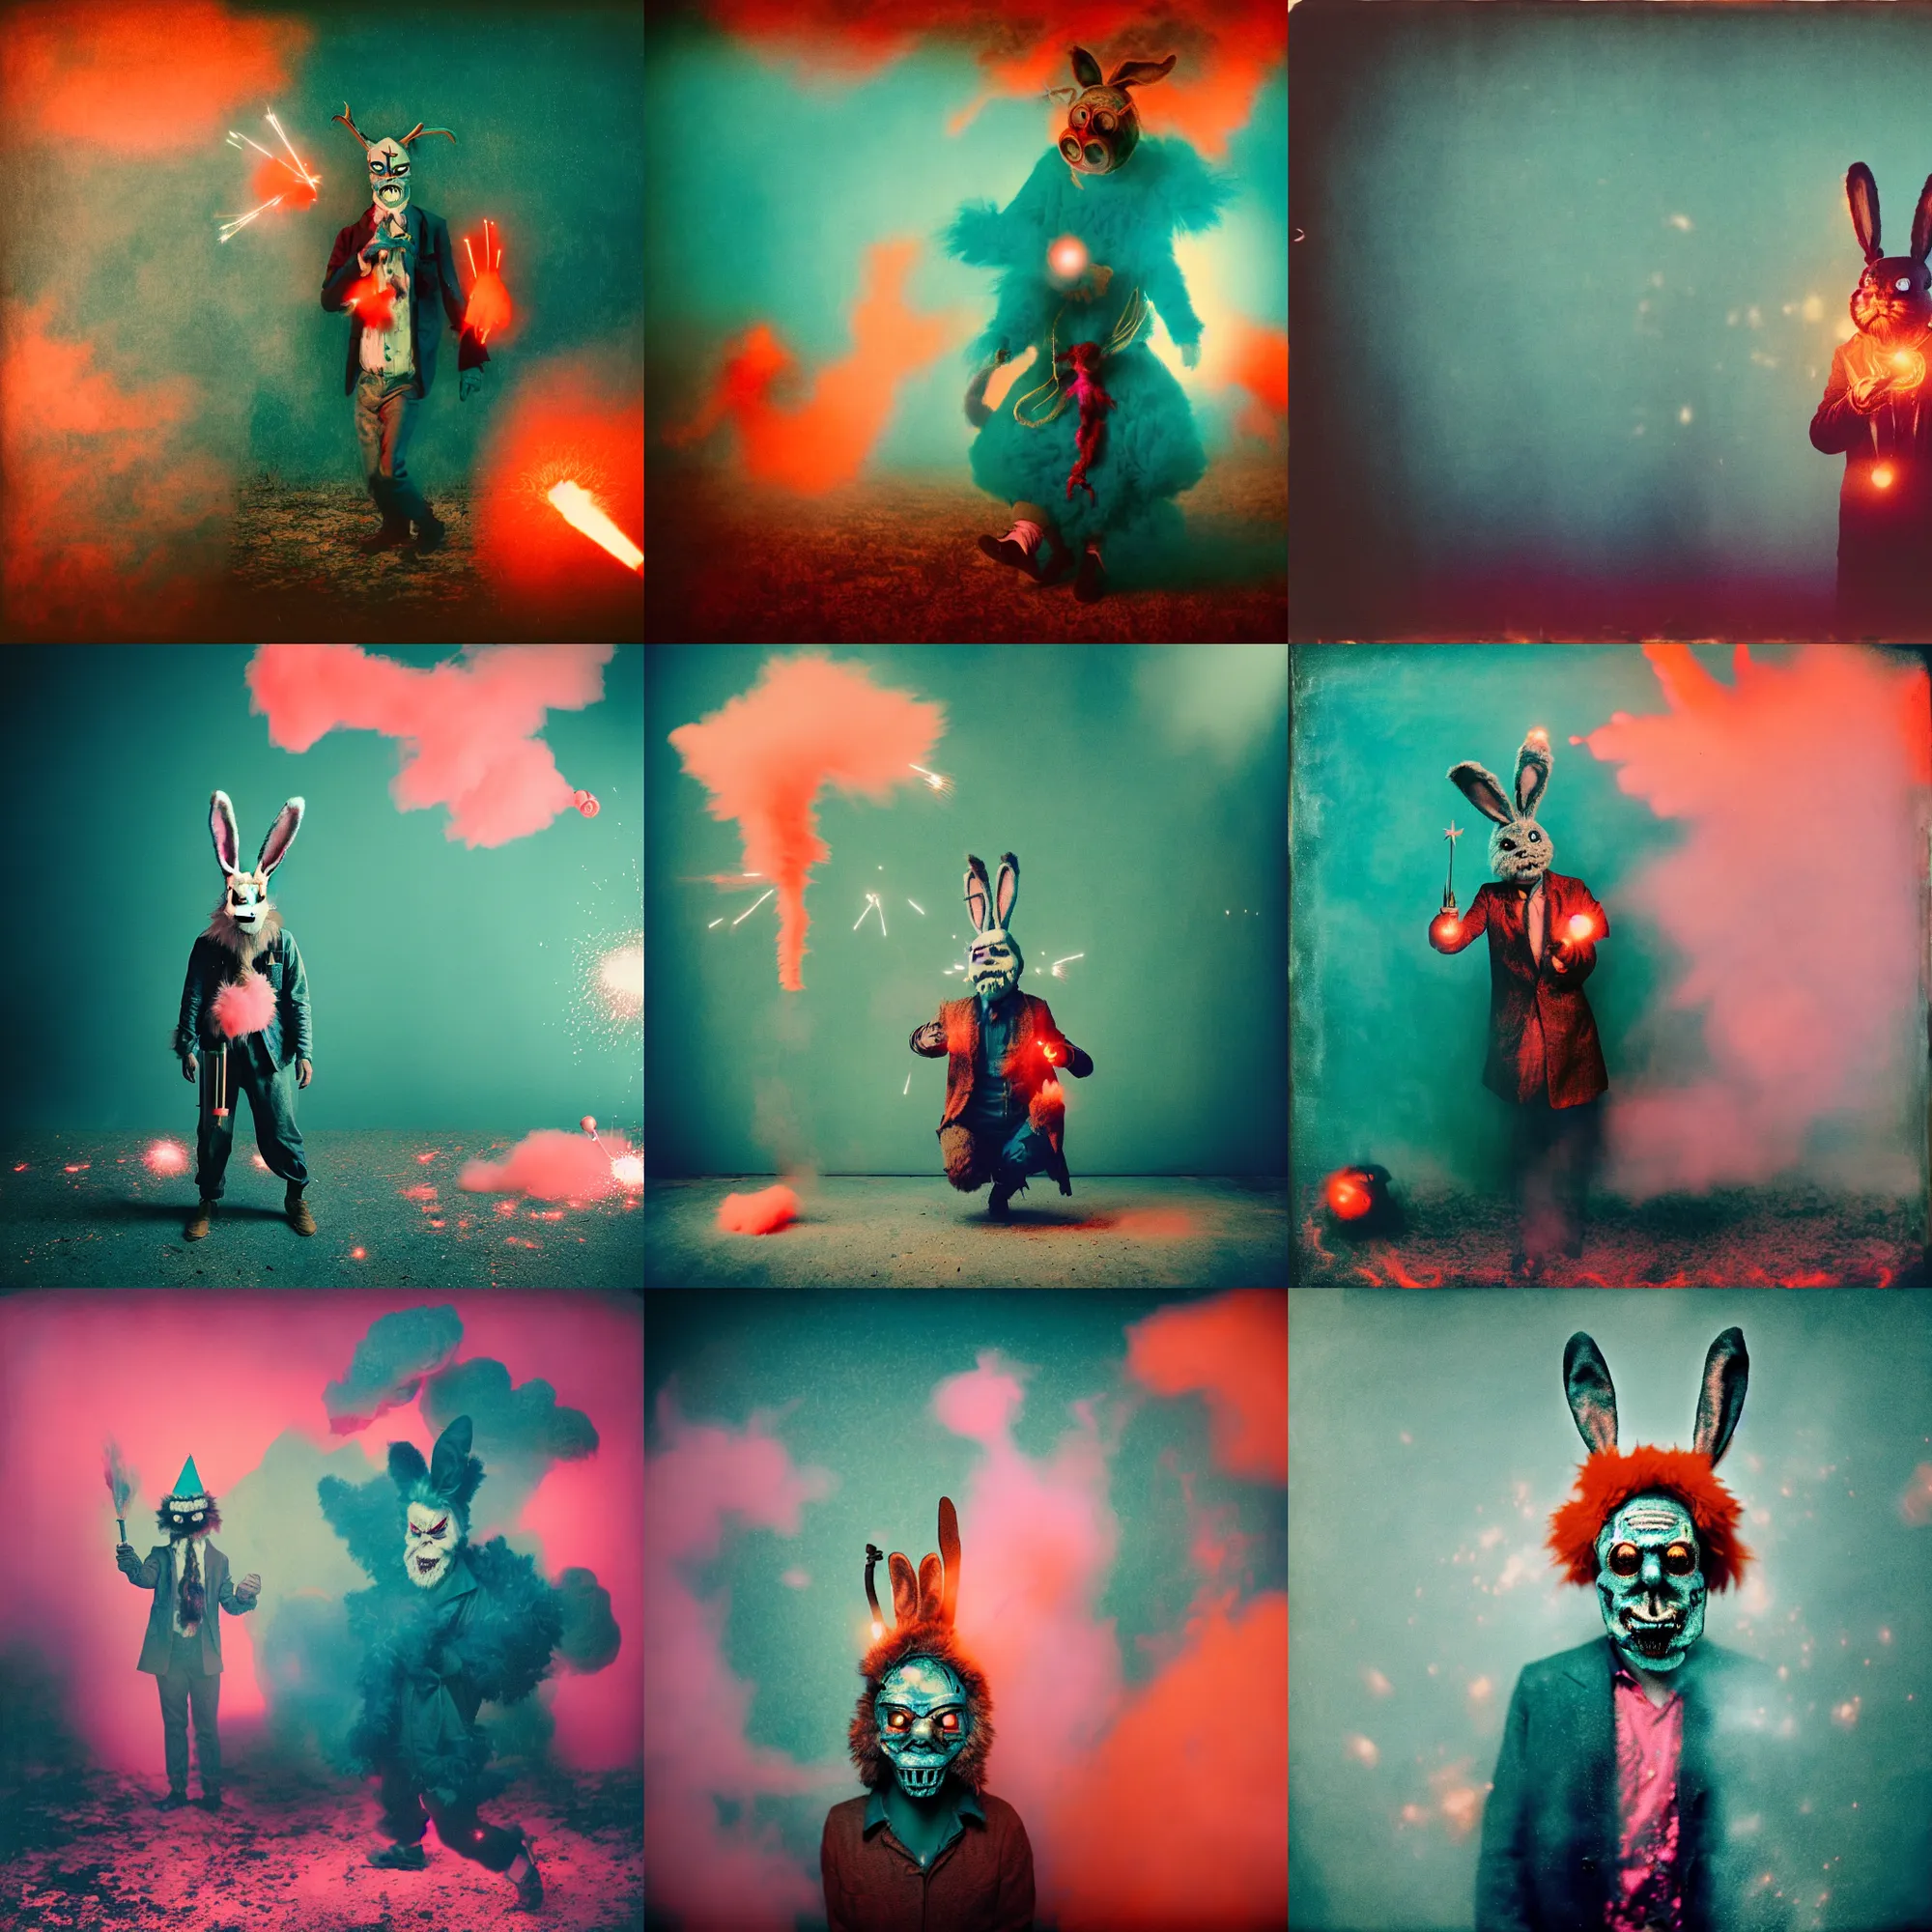 Prompt: kodak portra 4 0 0, wetplate, teal and orange and pink colours, explosions, rockets, krampus, bunny head, the walking dead, 1 9 1 0 s style, motion blur, portrait photo of a backdrop, bombs, sparkling, fog, by georges melies and by britt marling